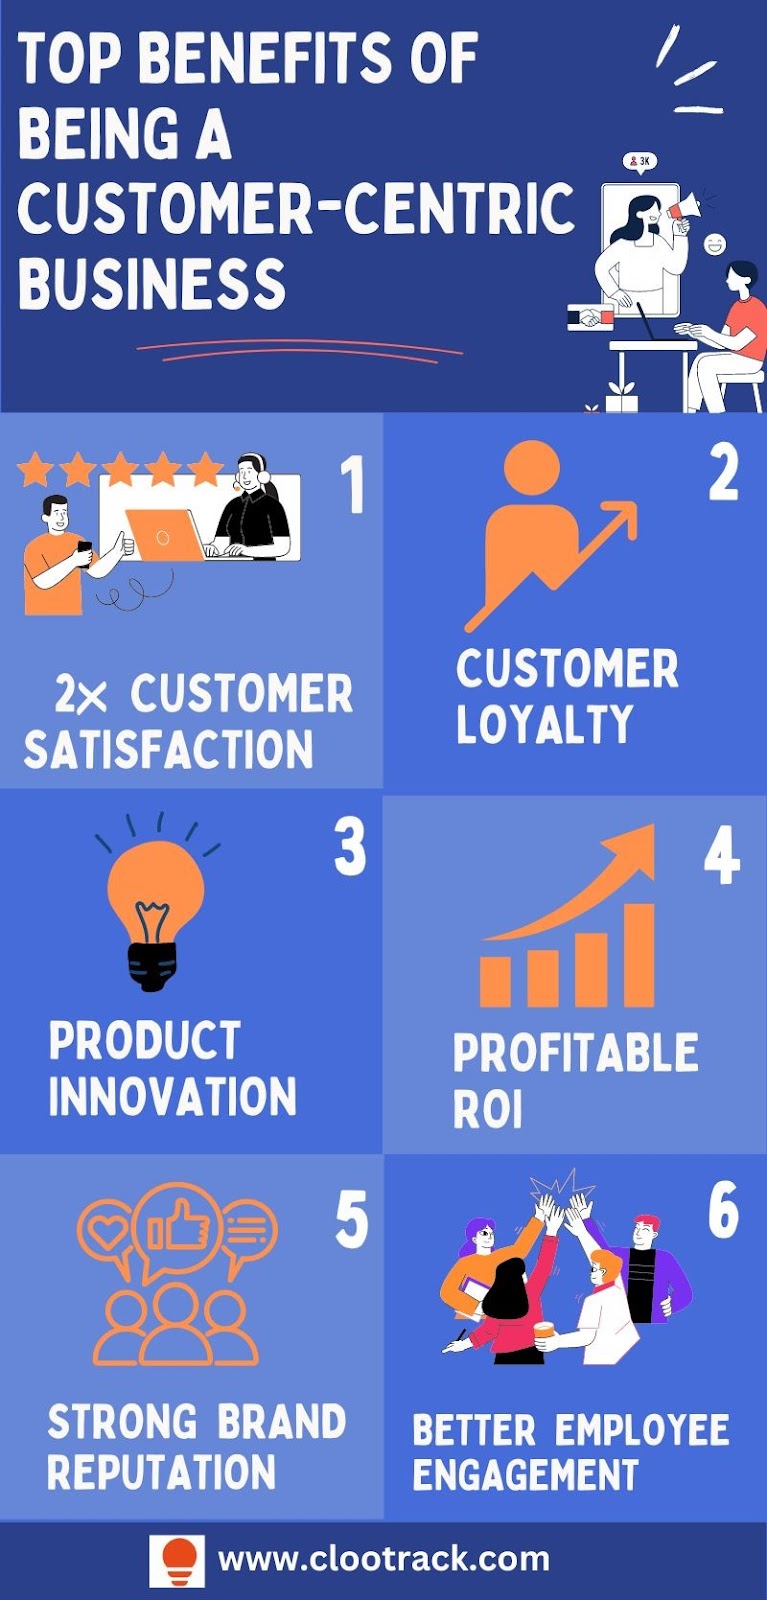 Top Benefits of a customer-centric business approach in improving customer experience